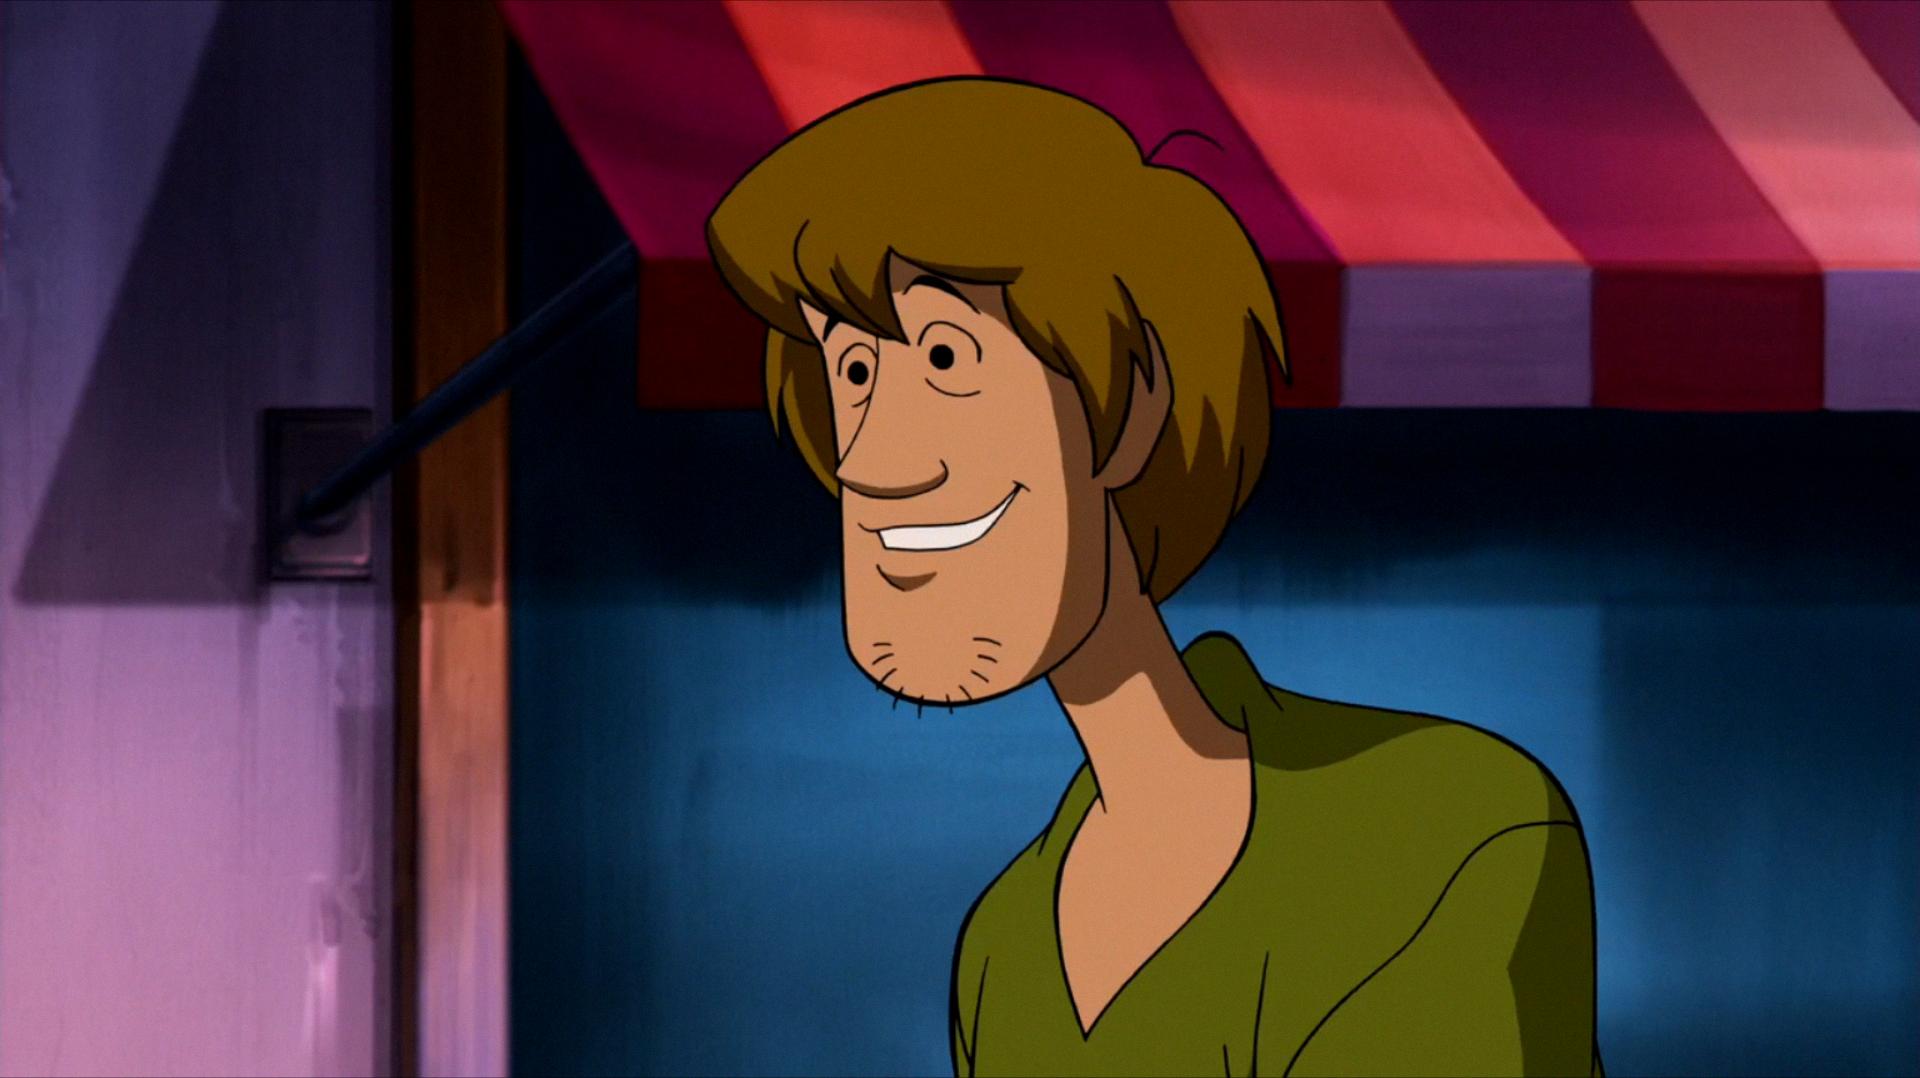 how old is shaggy from scooby doo